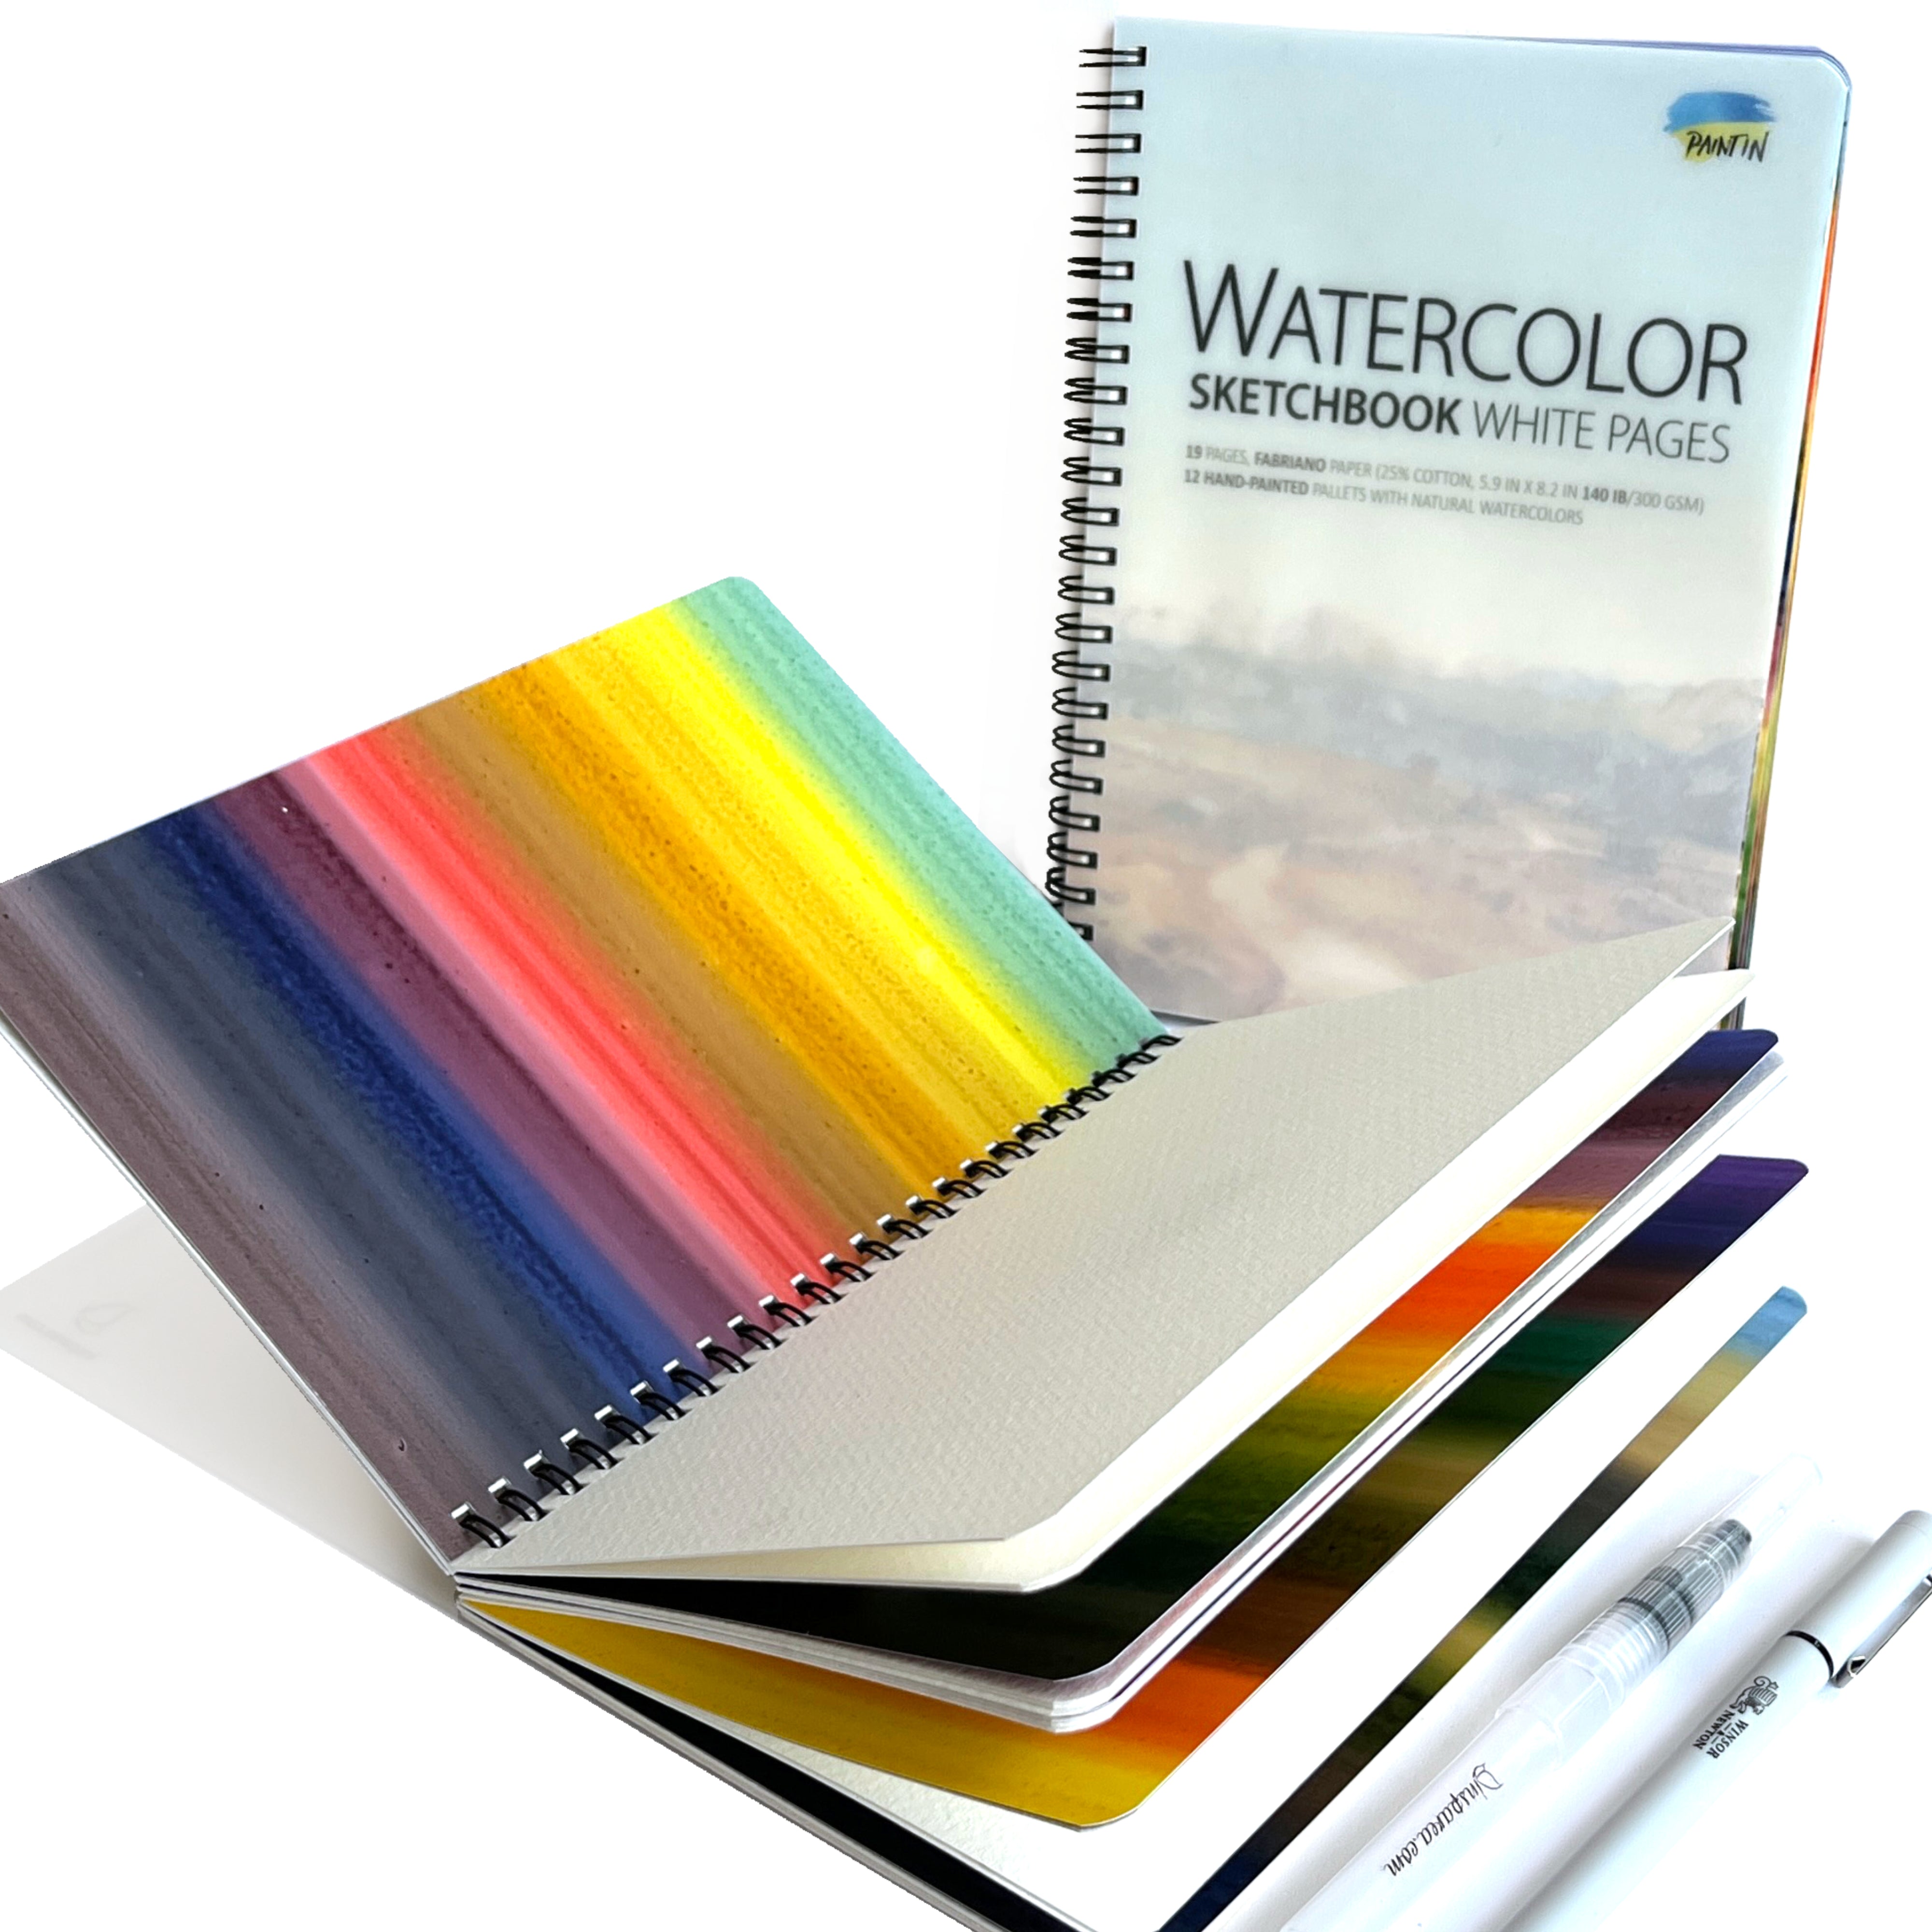 Personalized PaintIN Sketchbook with Blank Pages 300 gsm Suitable for –  Insparea